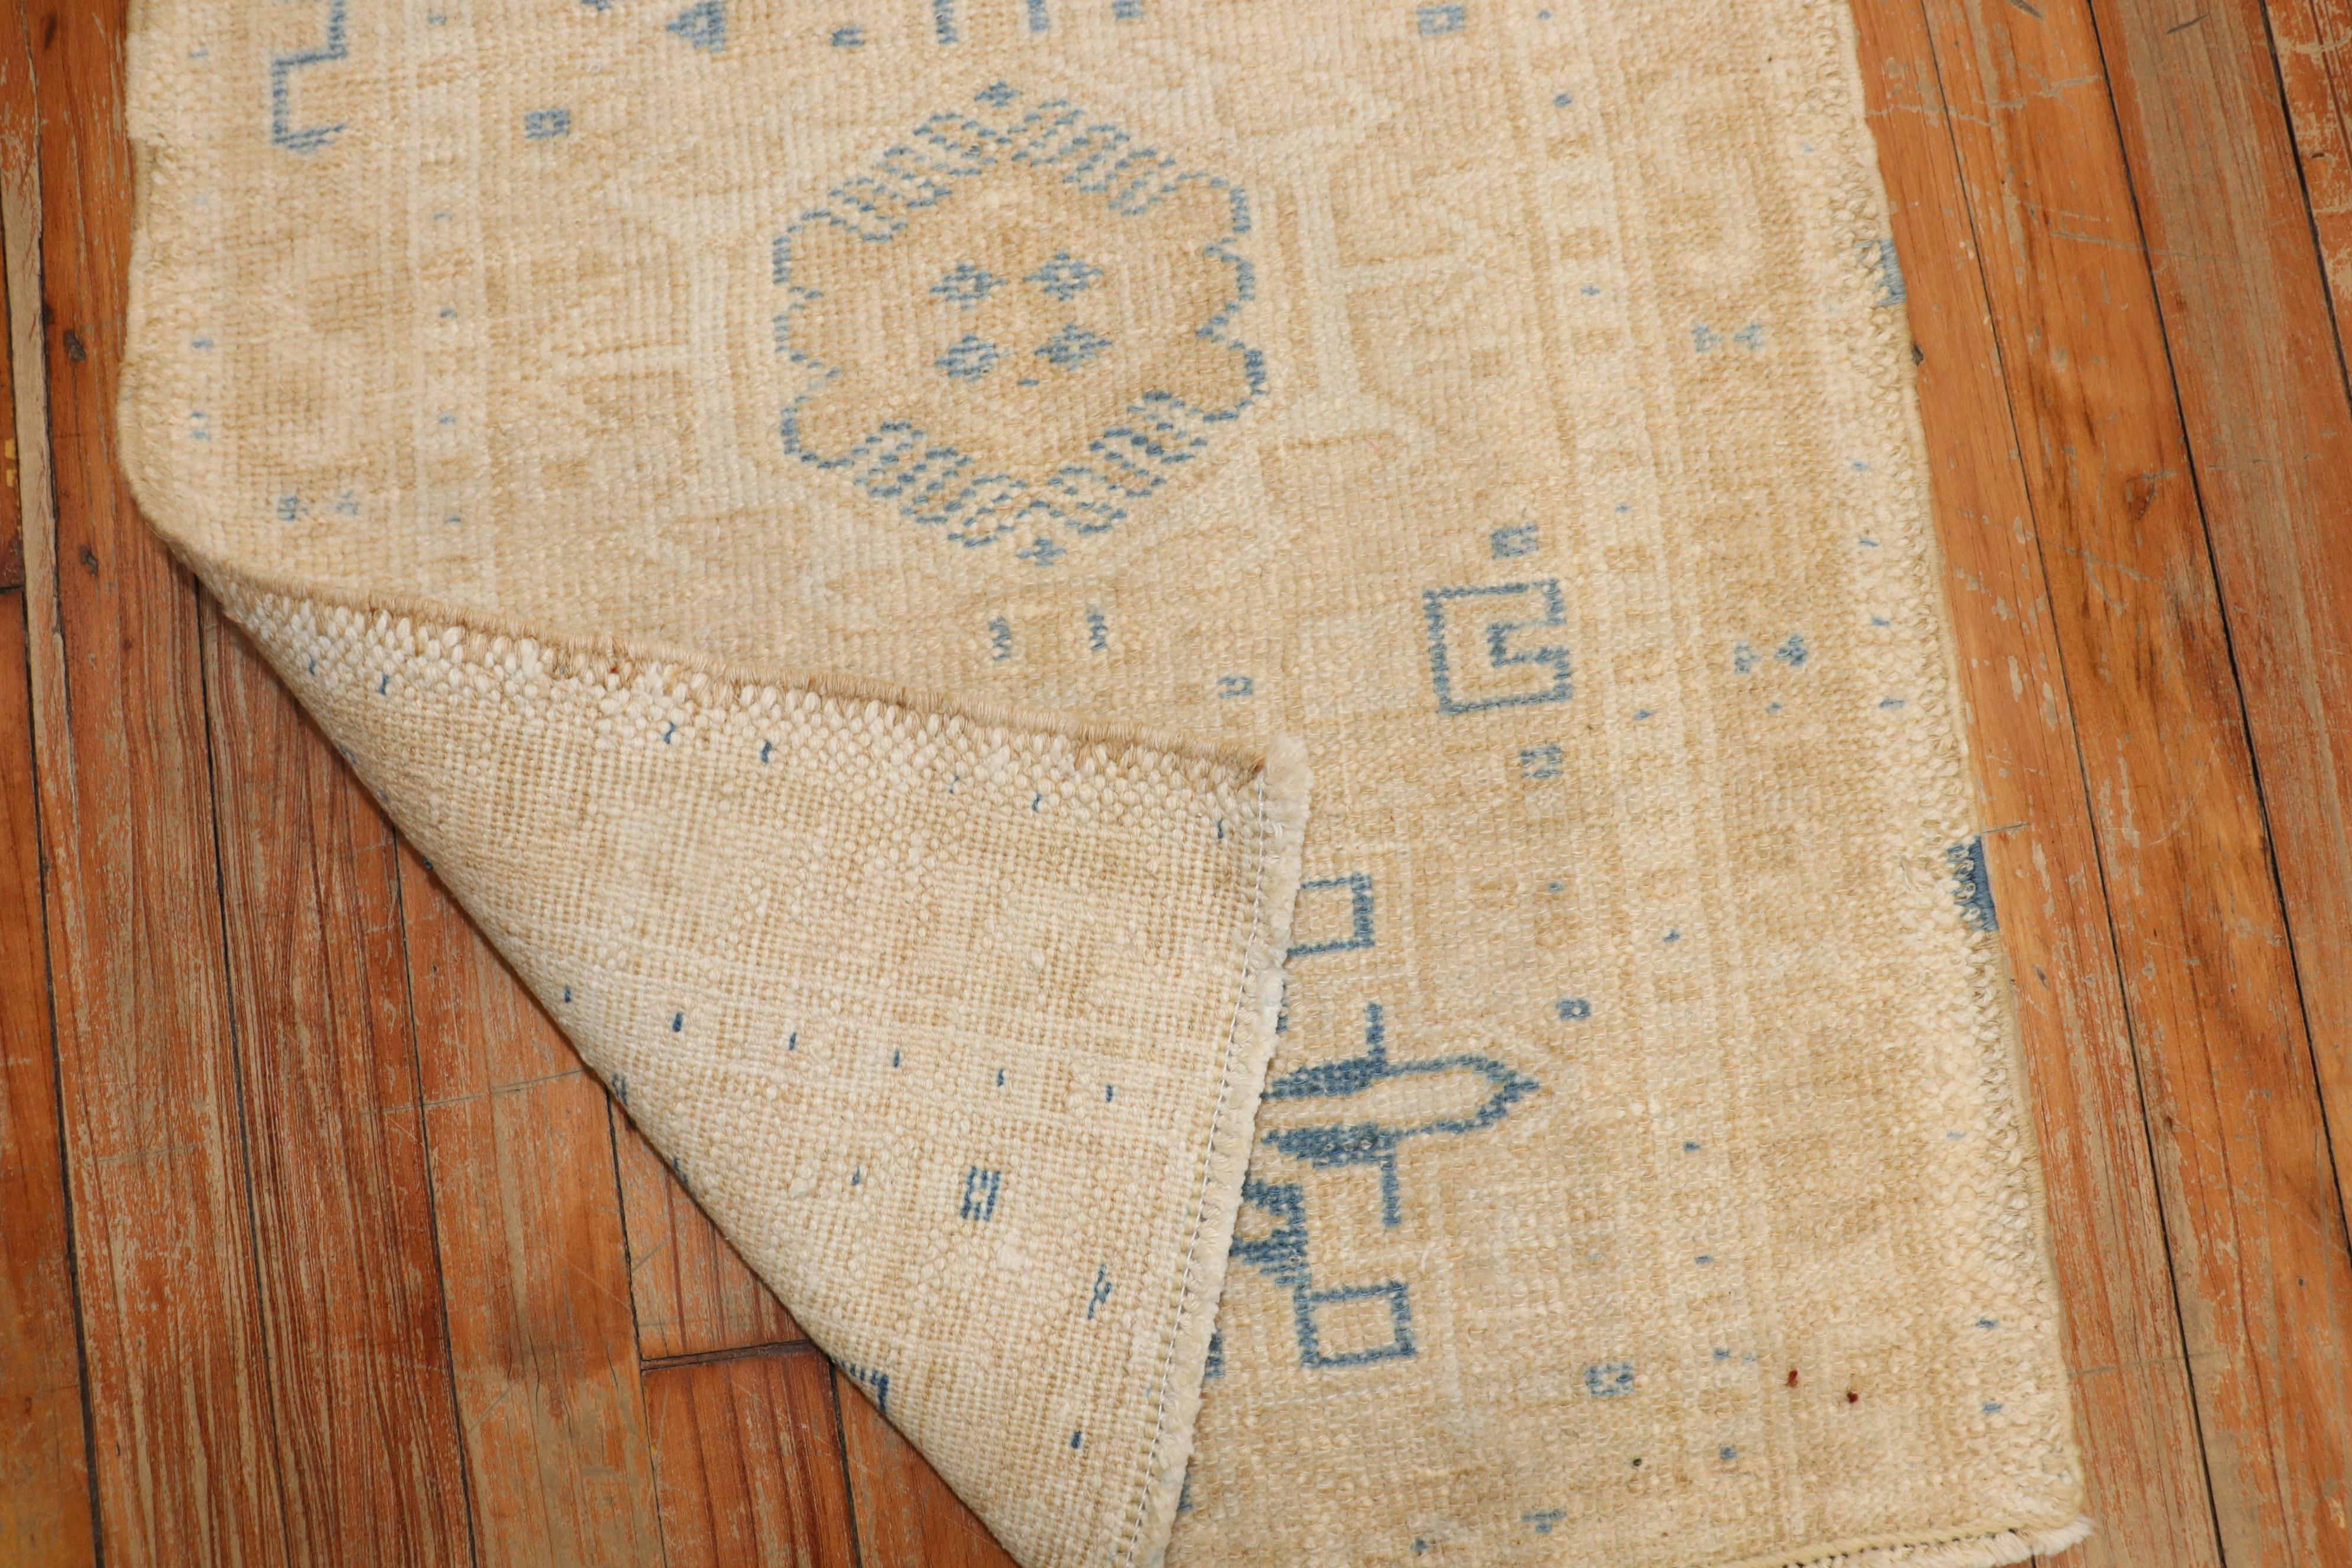 1st quarter of the 20th-century Mini size Persian Heriz rug in neutral colors

Measures: 1'10'' x 2'9''